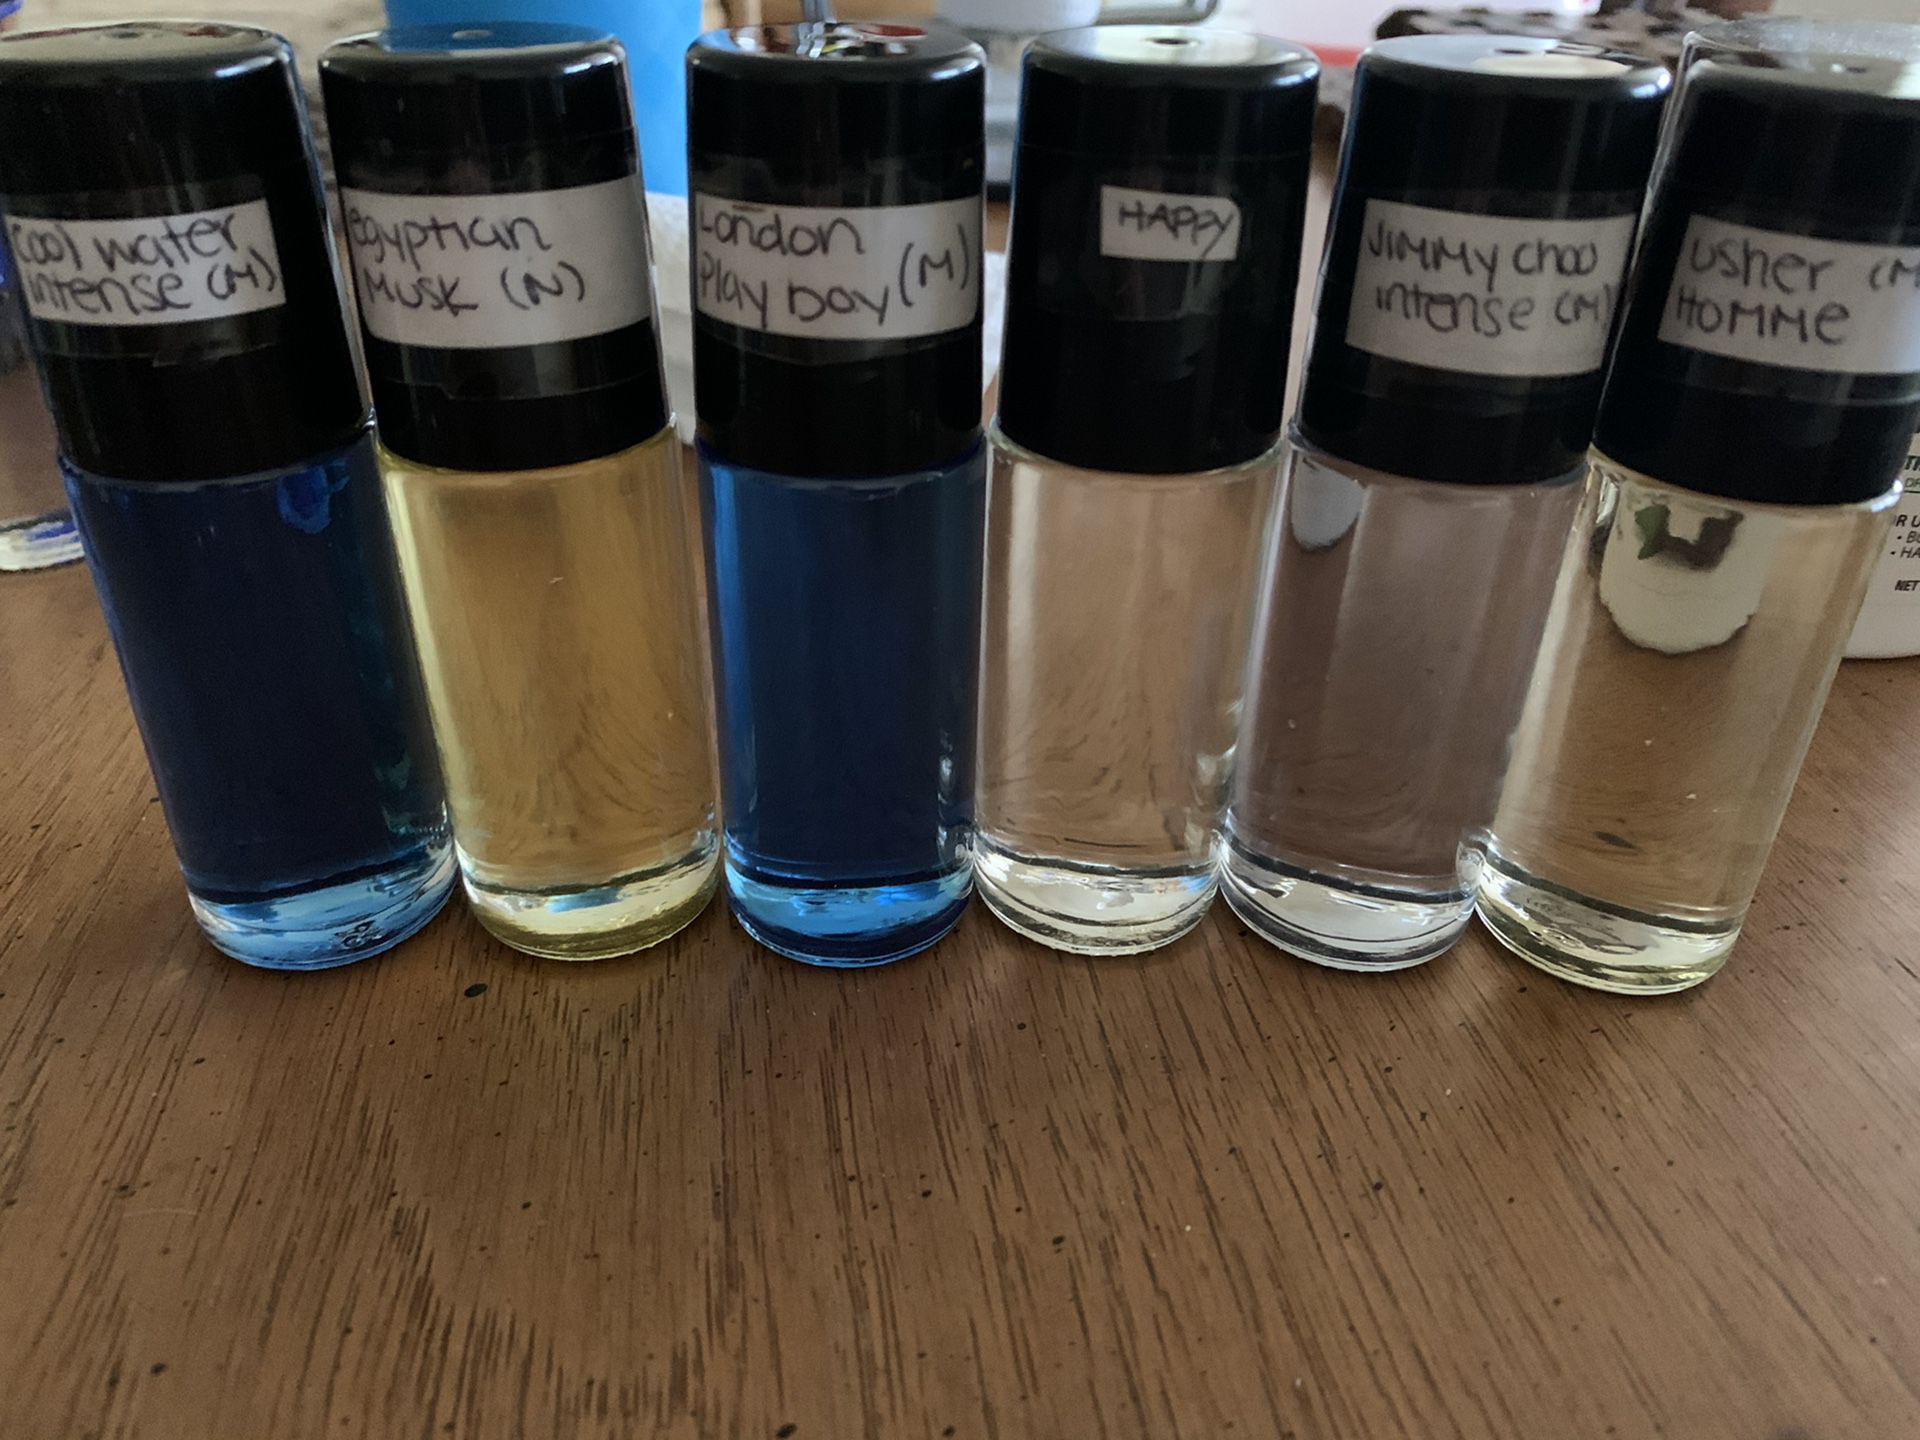 Body oils with fragrance listed